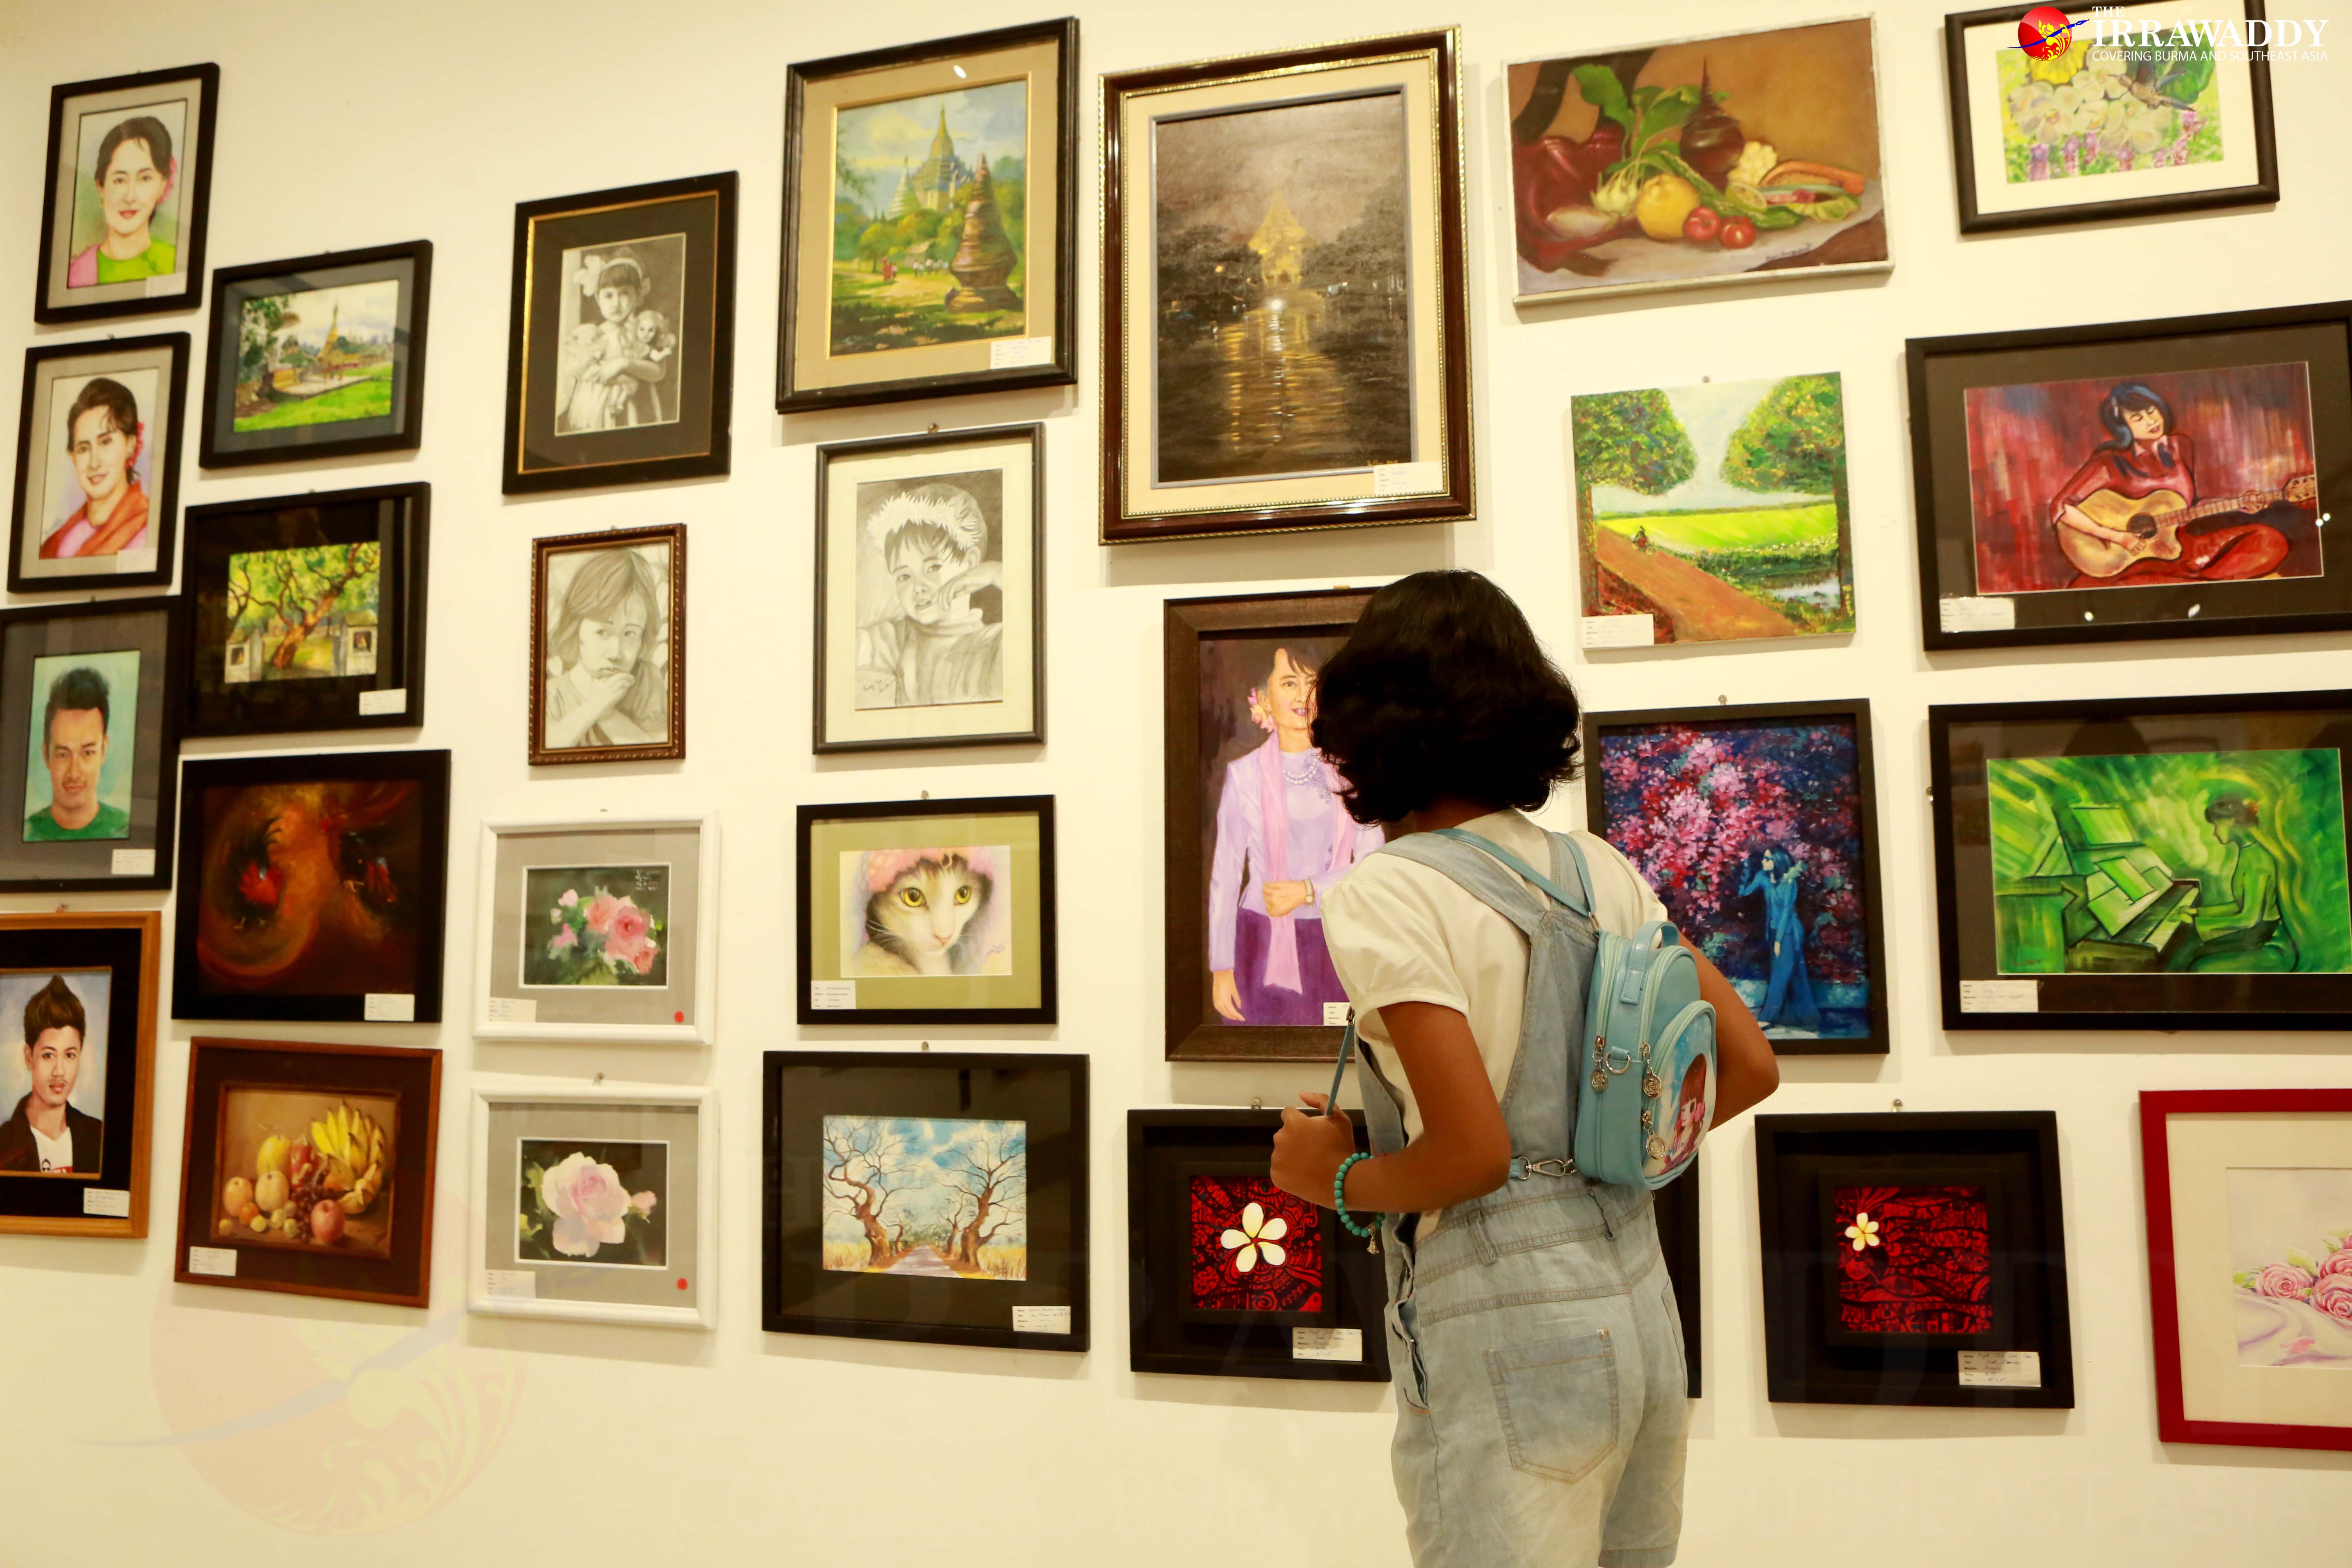 Female Artists’ Exhibition Opens in Rangoon